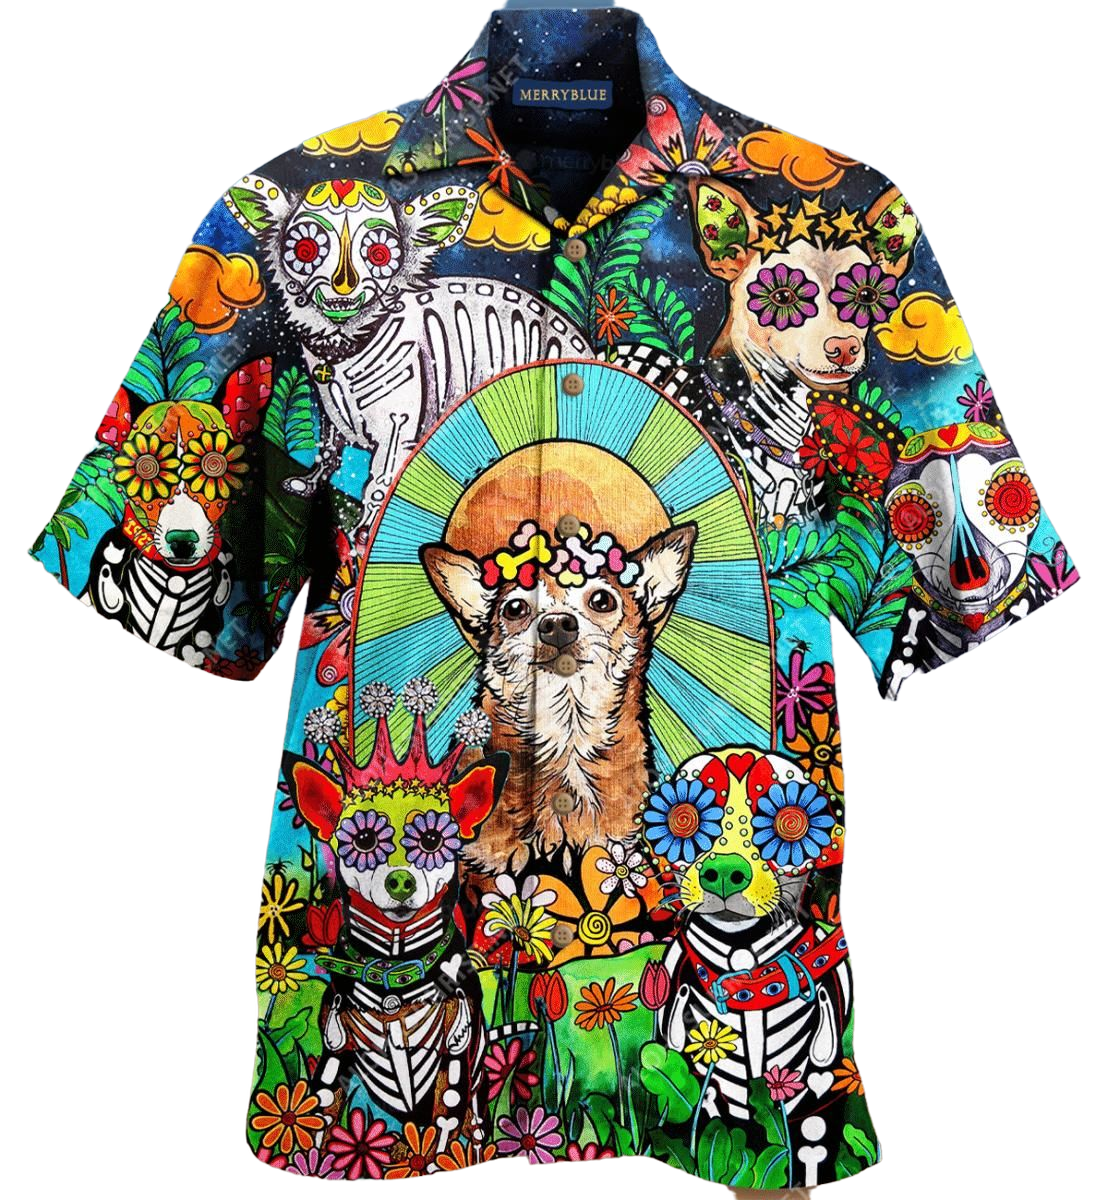 kurobase-all-you-need-is-love-and-a-chihuahua-colorful-unique-design-unisex-hawaii-shirt-hawaiian-shirt-for-men-and-women.png